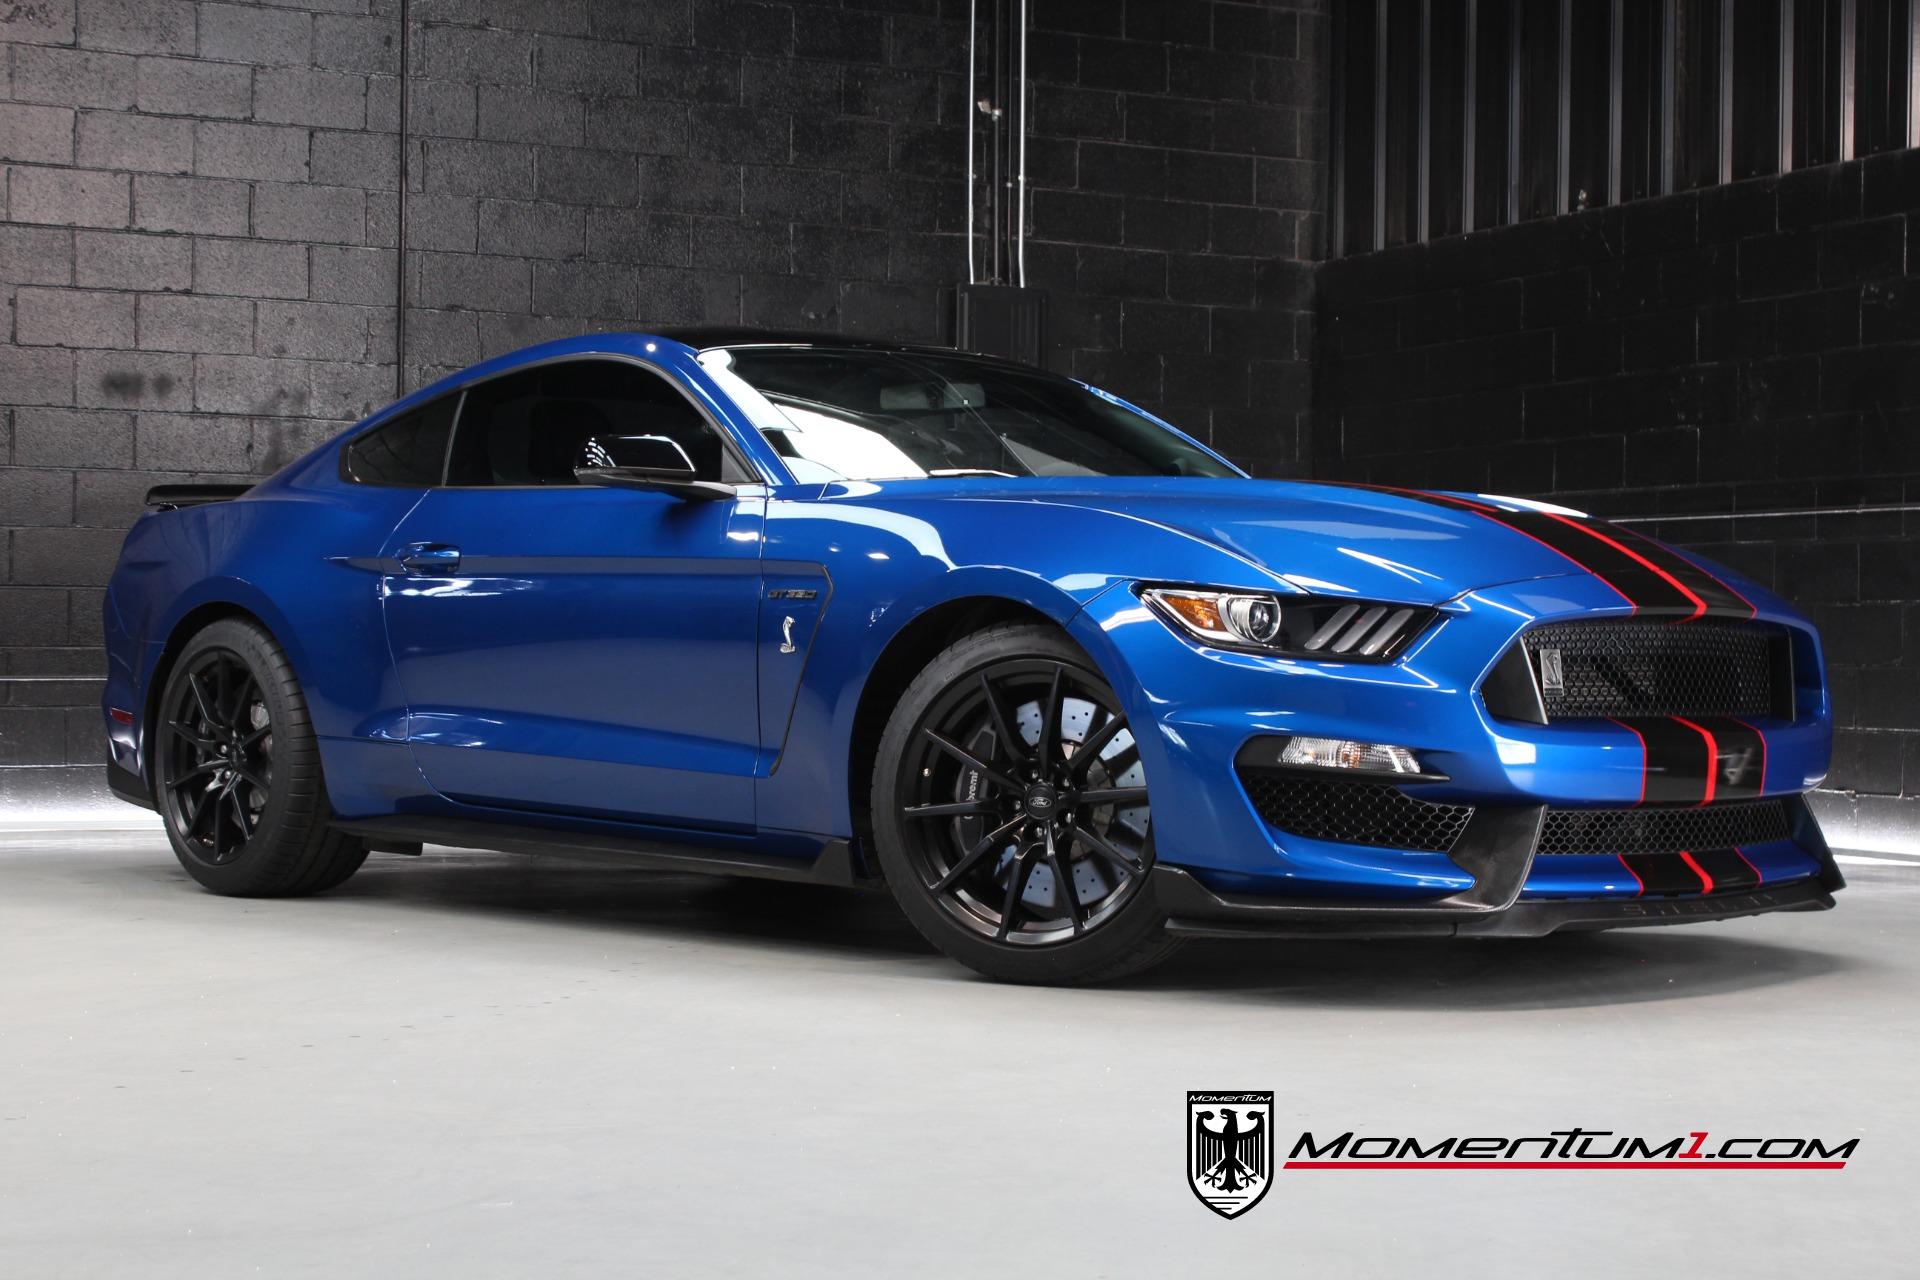 Used 2017 Ford Mustang Shelby GT350 For Sale (Sold) | Momentum ...